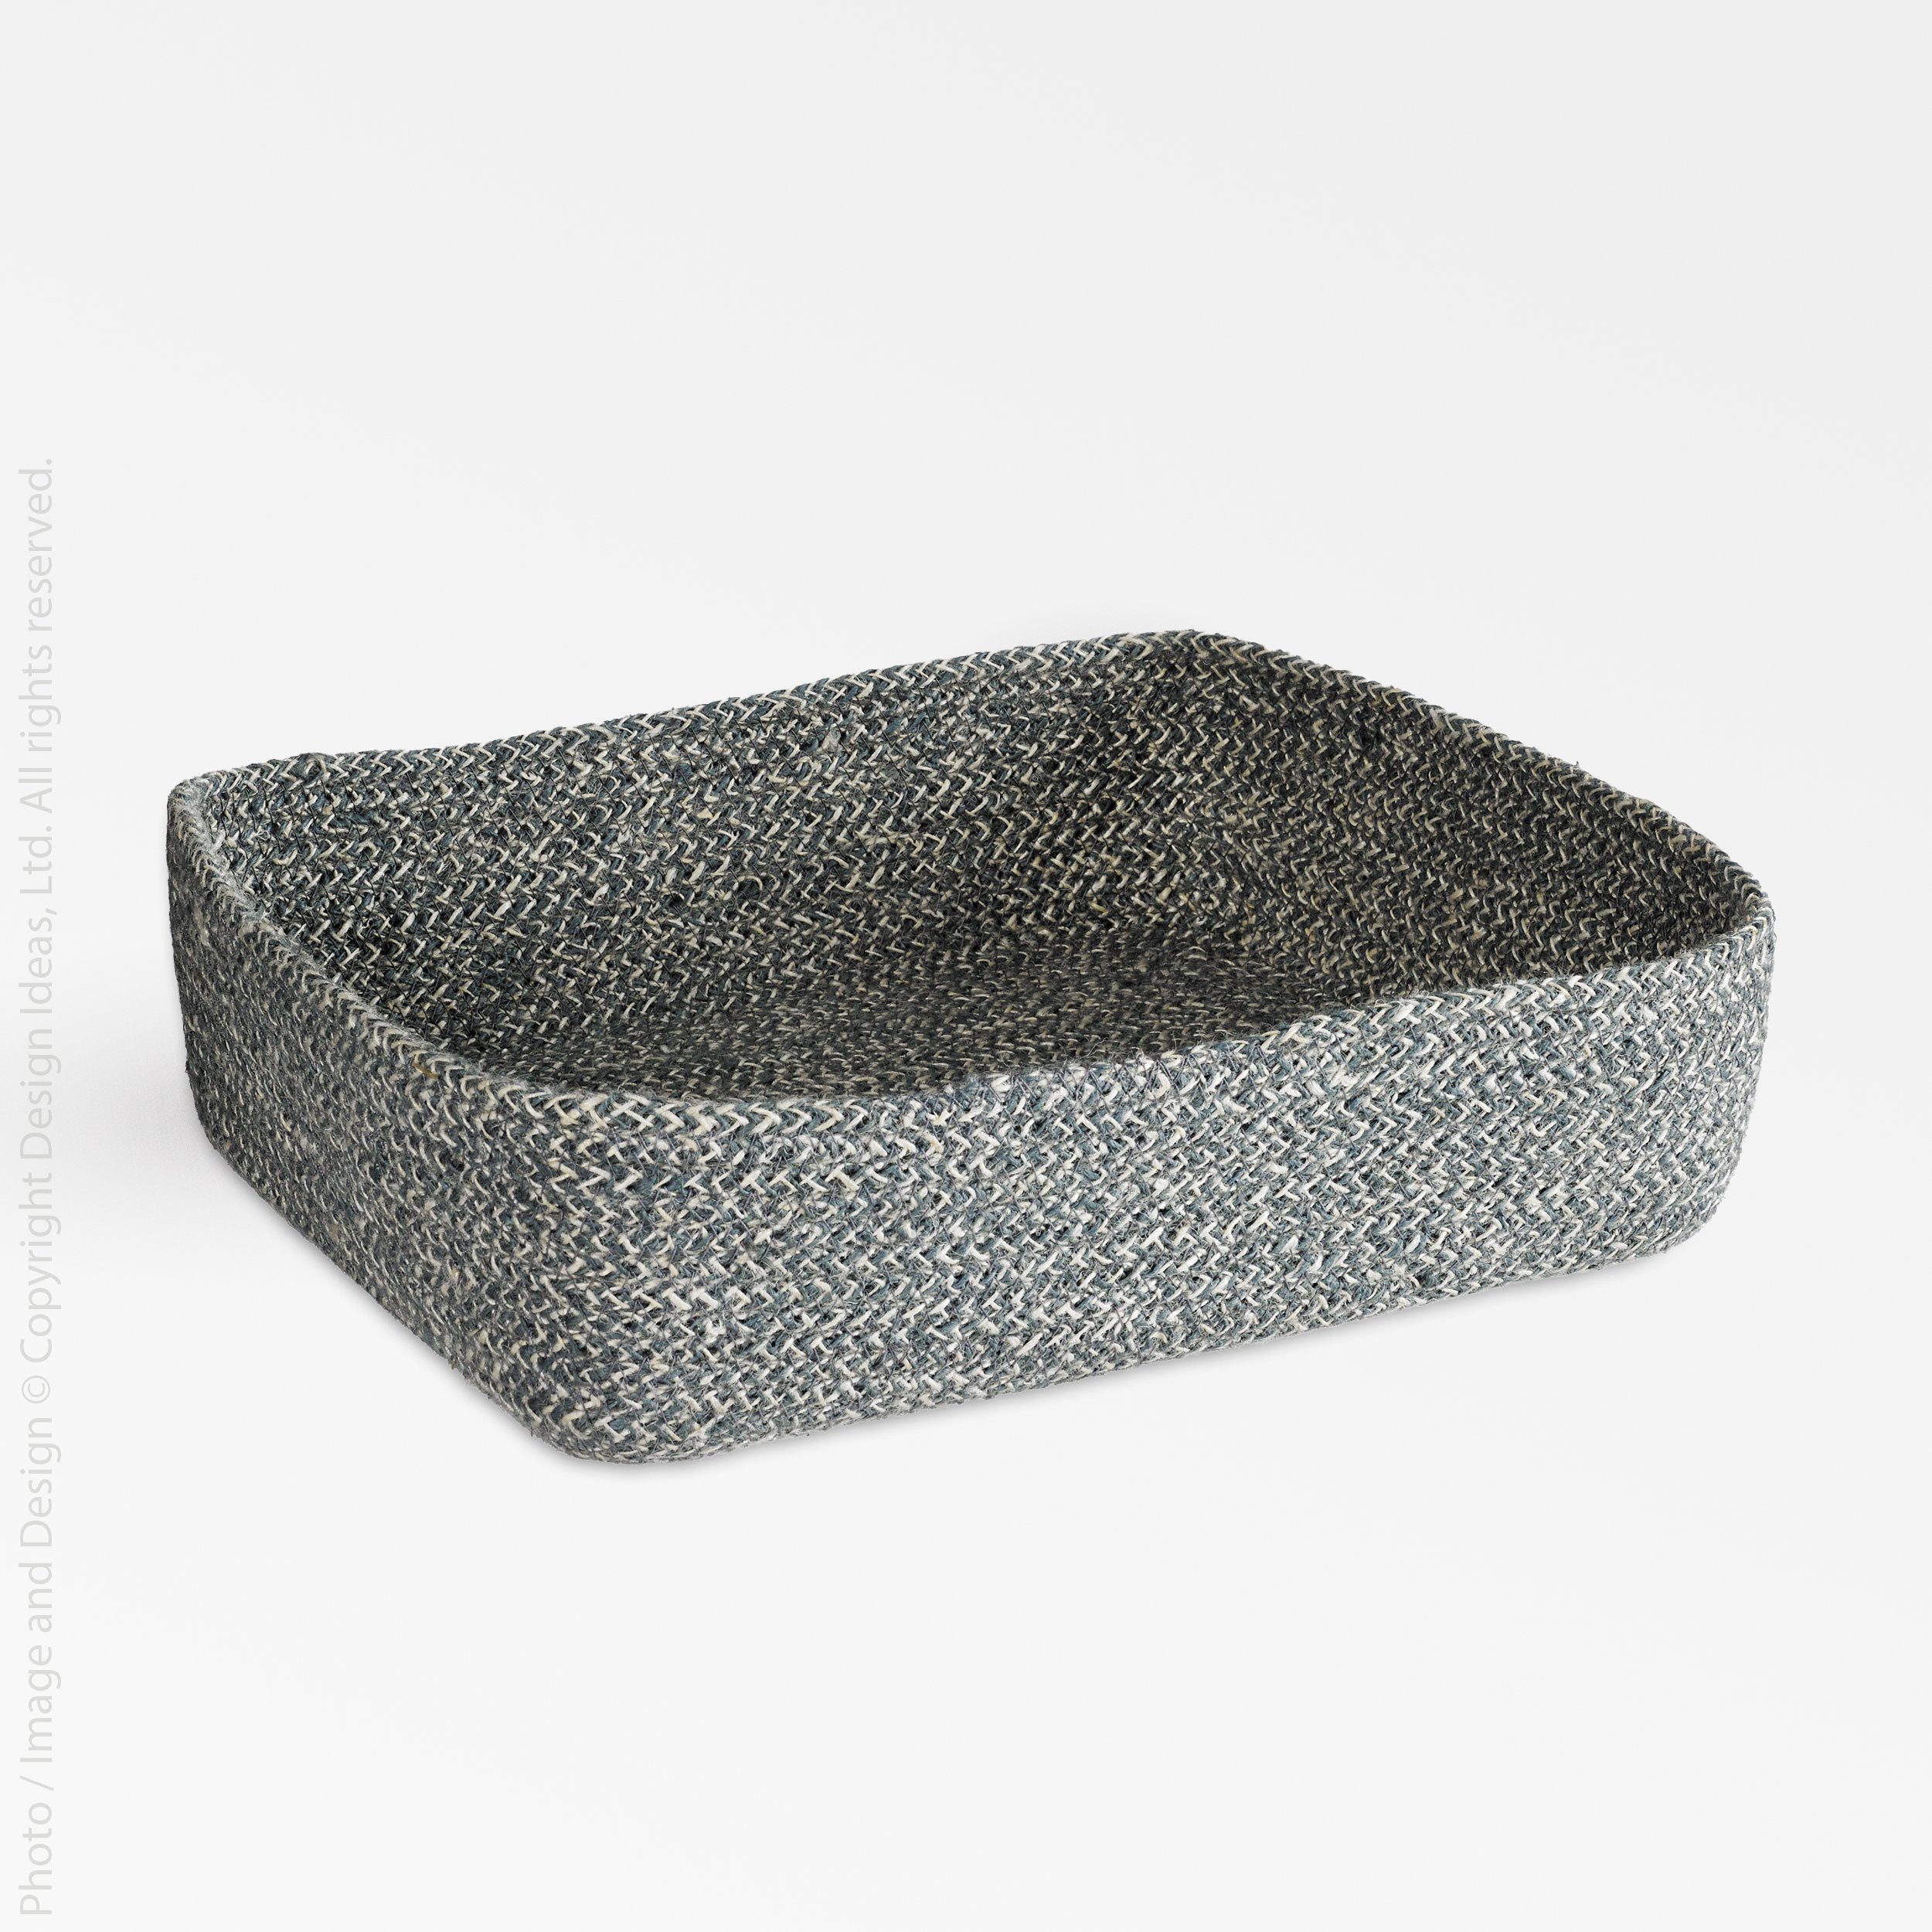 Melia™ basket (12 x 9.5 x 3 in.) - Black | Image 4 | Premium Basket from the Melia collection | made with Jute for long lasting use | texxture